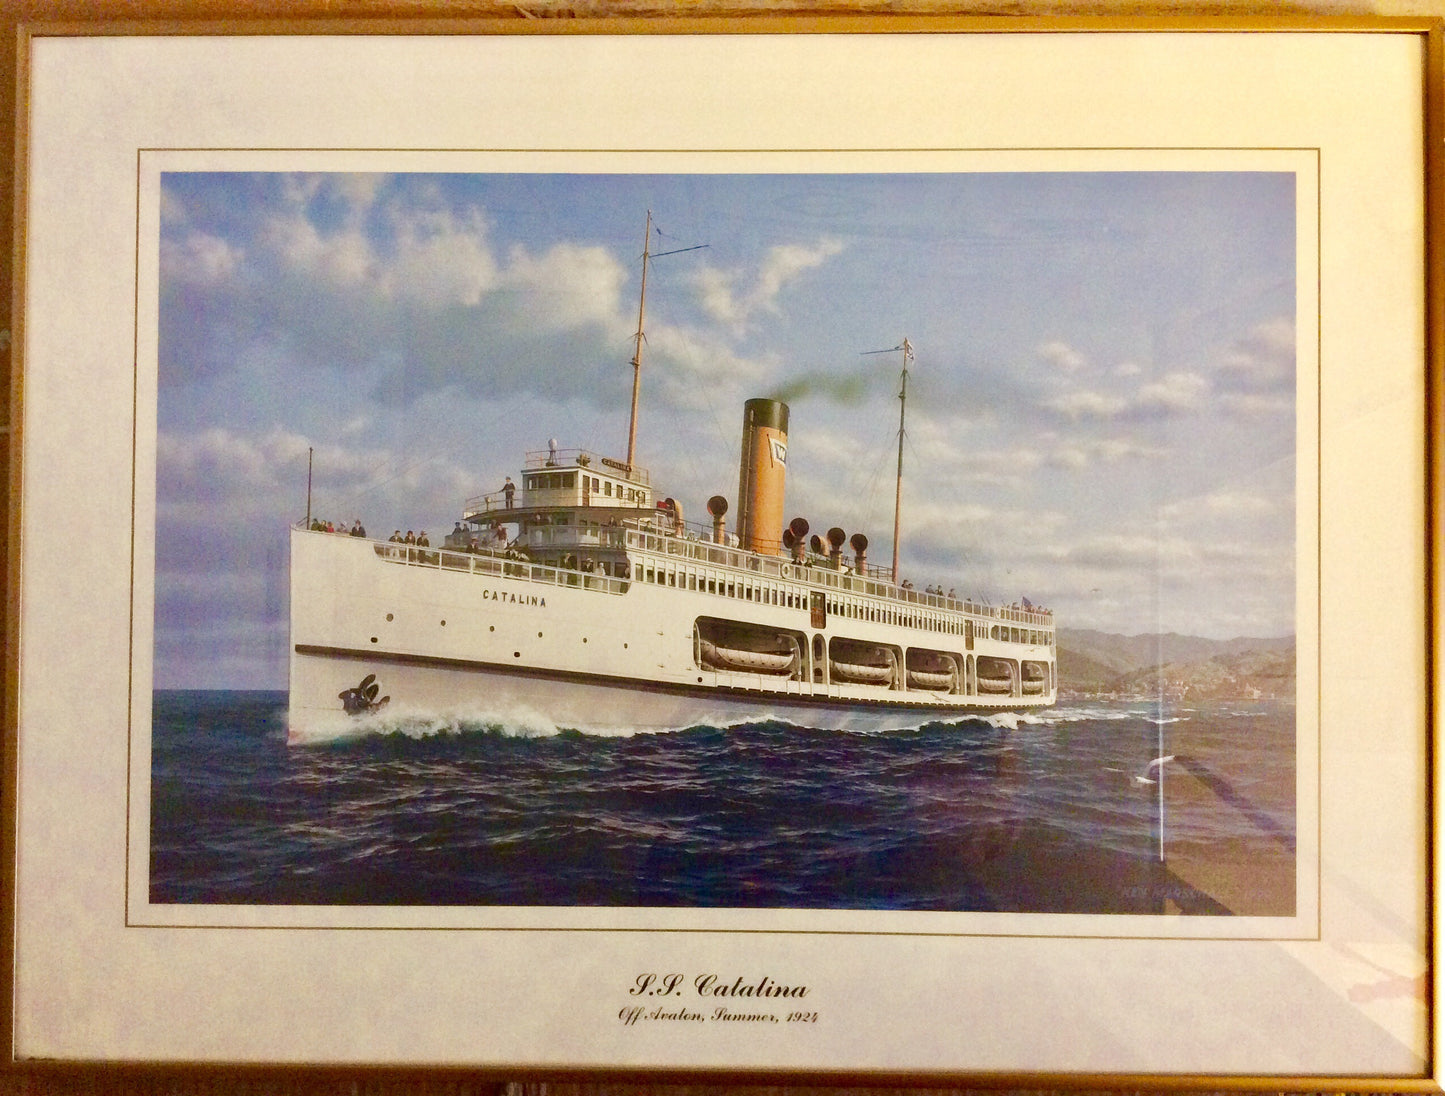 S.S. Catalina, Off Avalon, Summer of 1924, by Ken Marschall - Annapolis Maritime Antiques